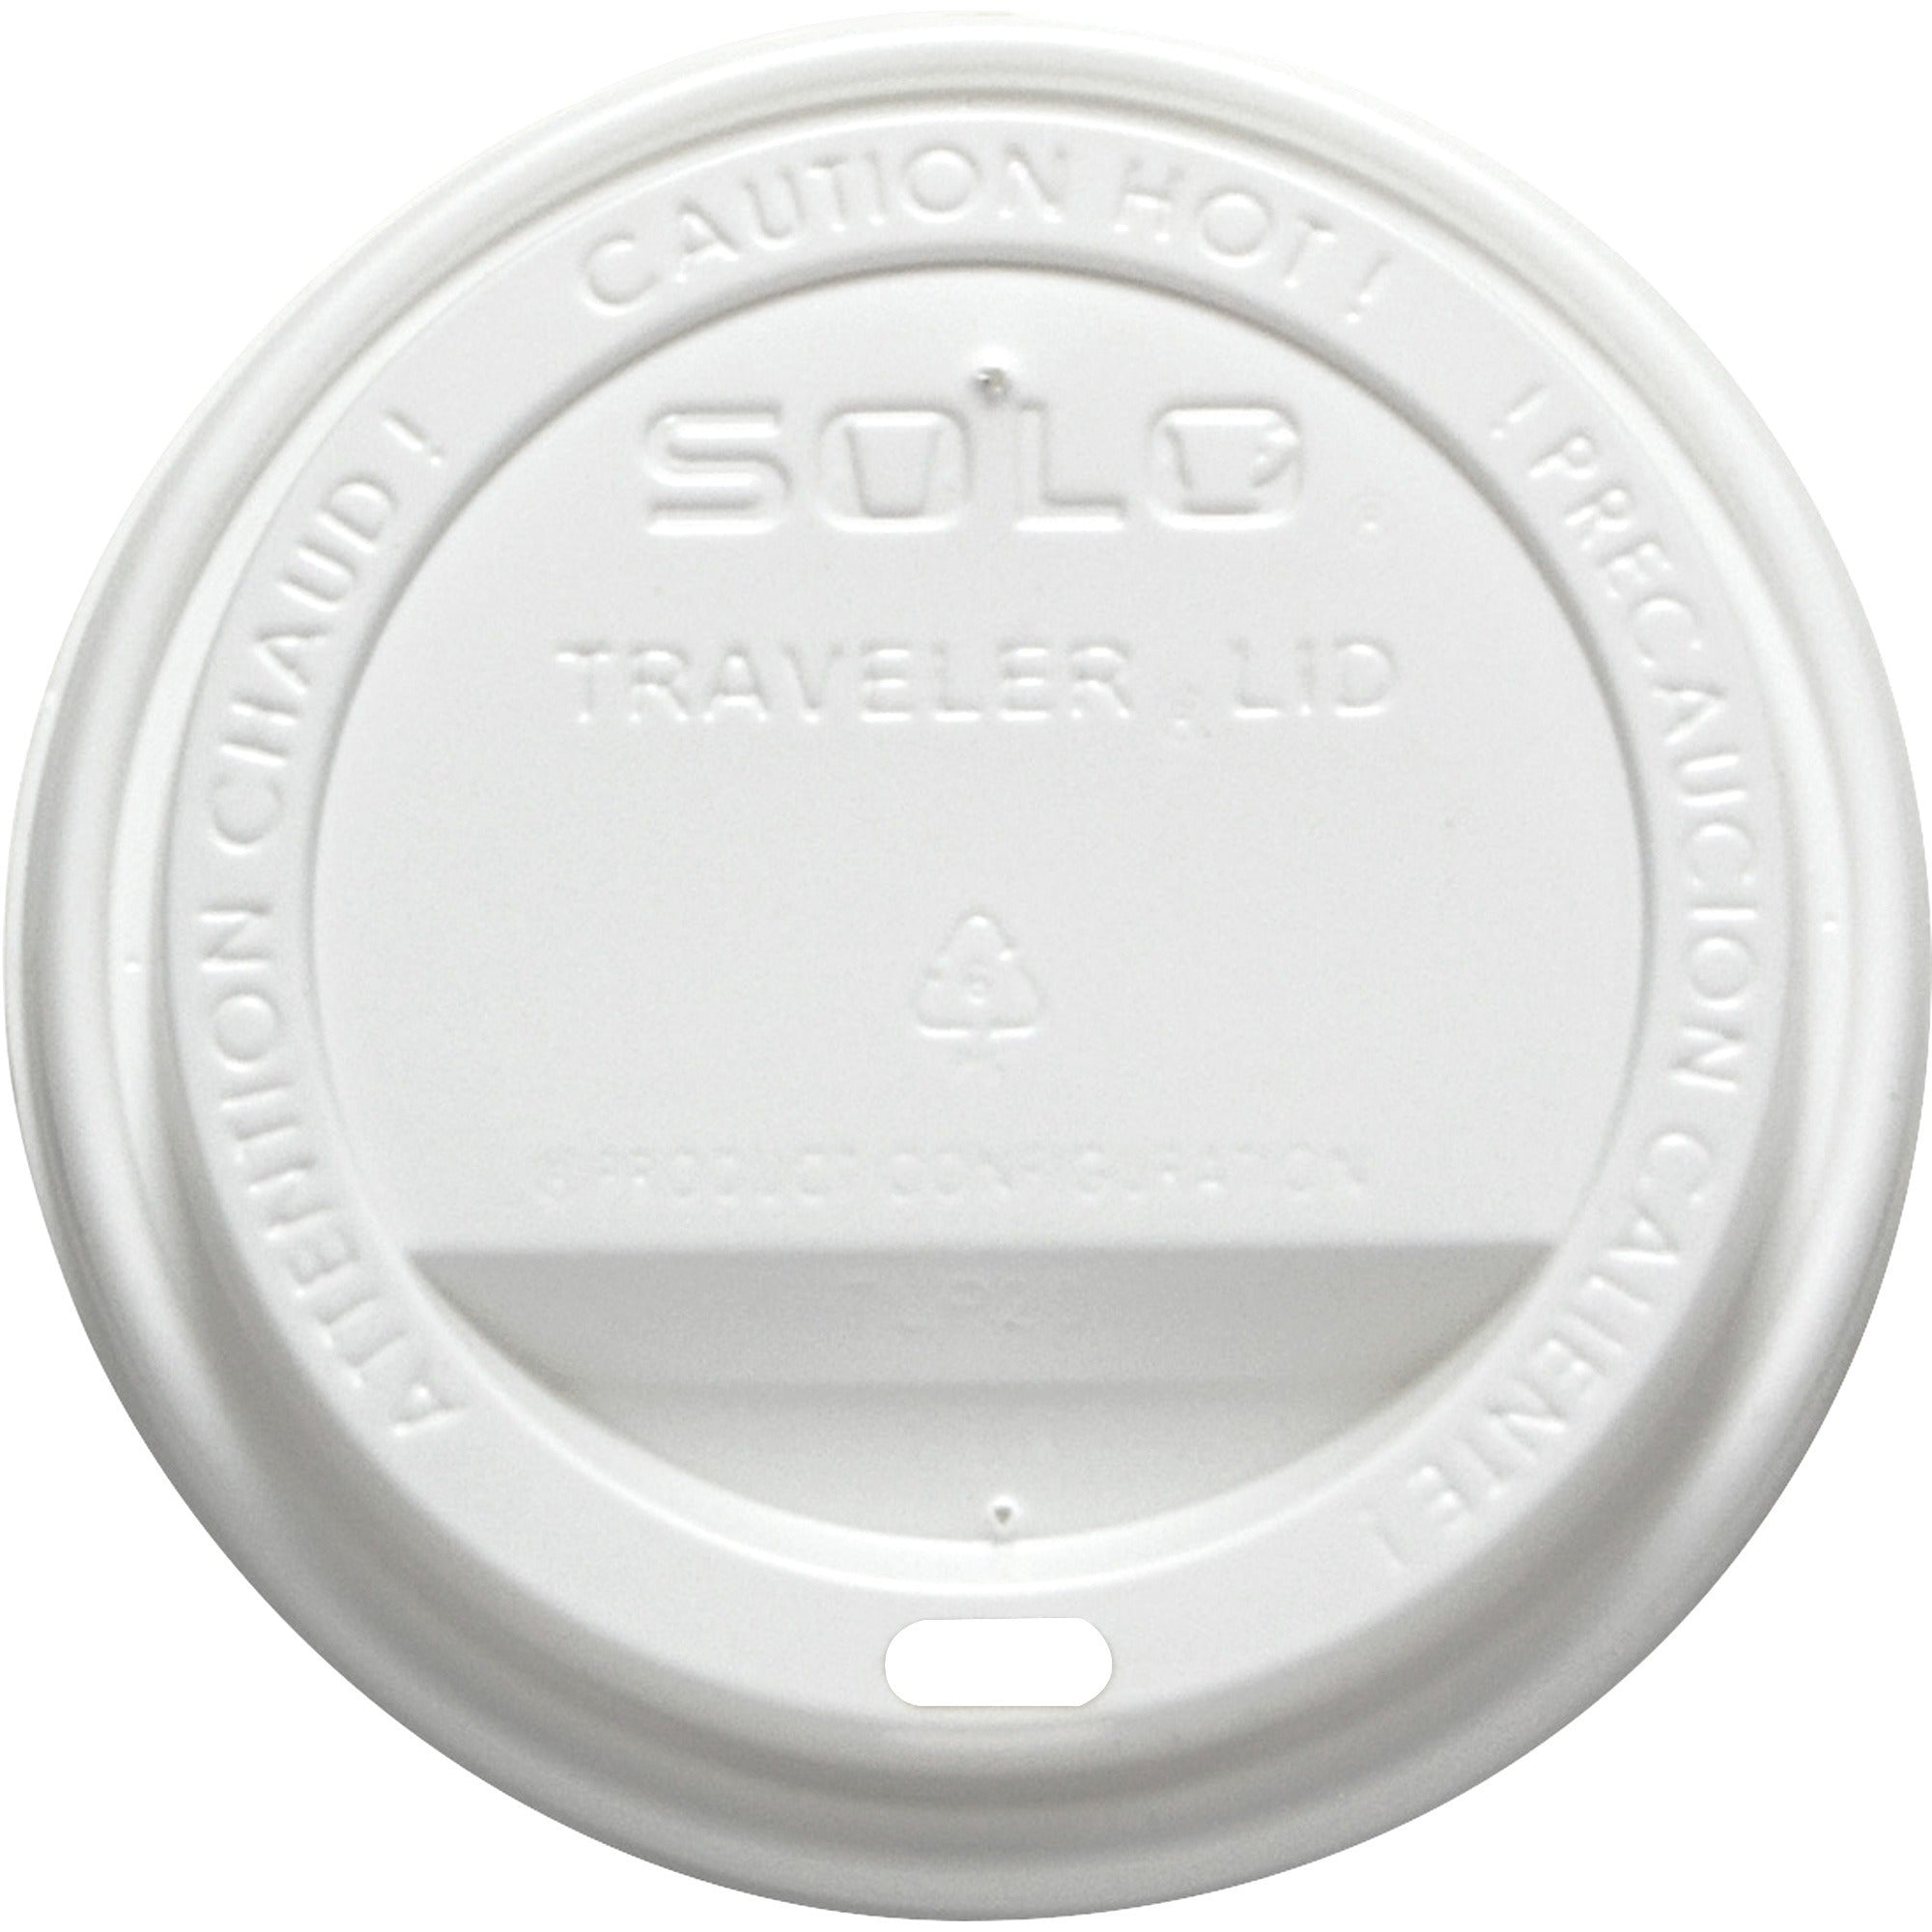 solo-cup-traveler-dome-hot-cup-lids-dome-10-pack-white_scctlp3160007 - 2